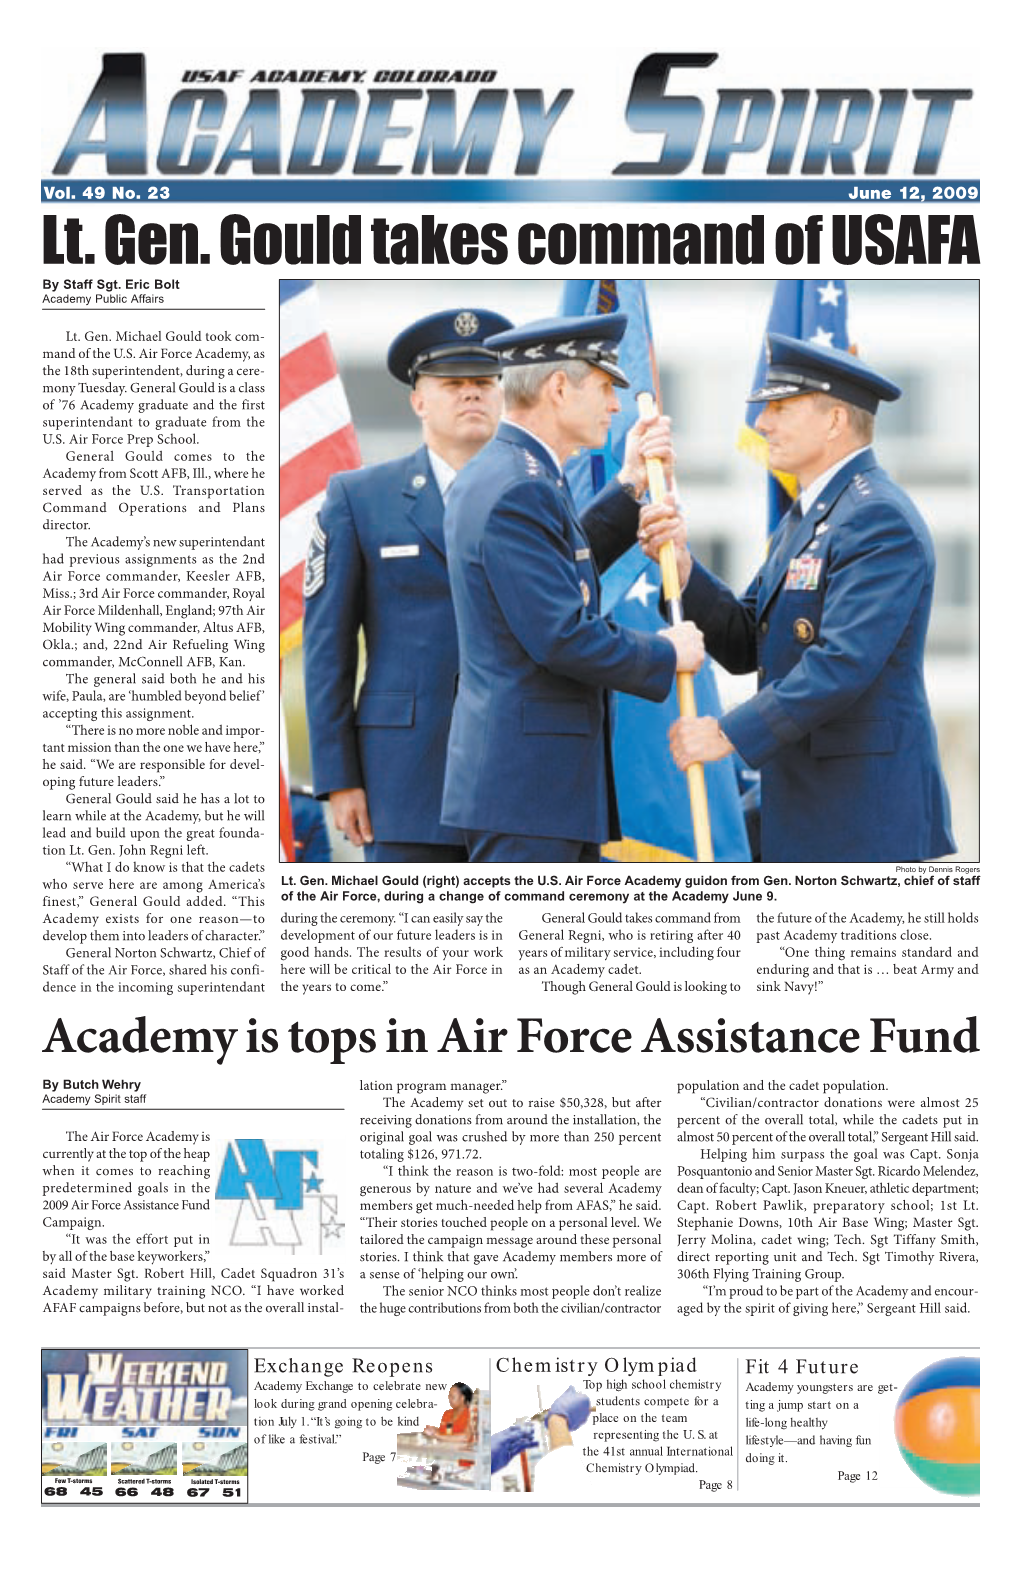 Lt. Gen. Gould Takes Command of USAFA by Staff Sgt